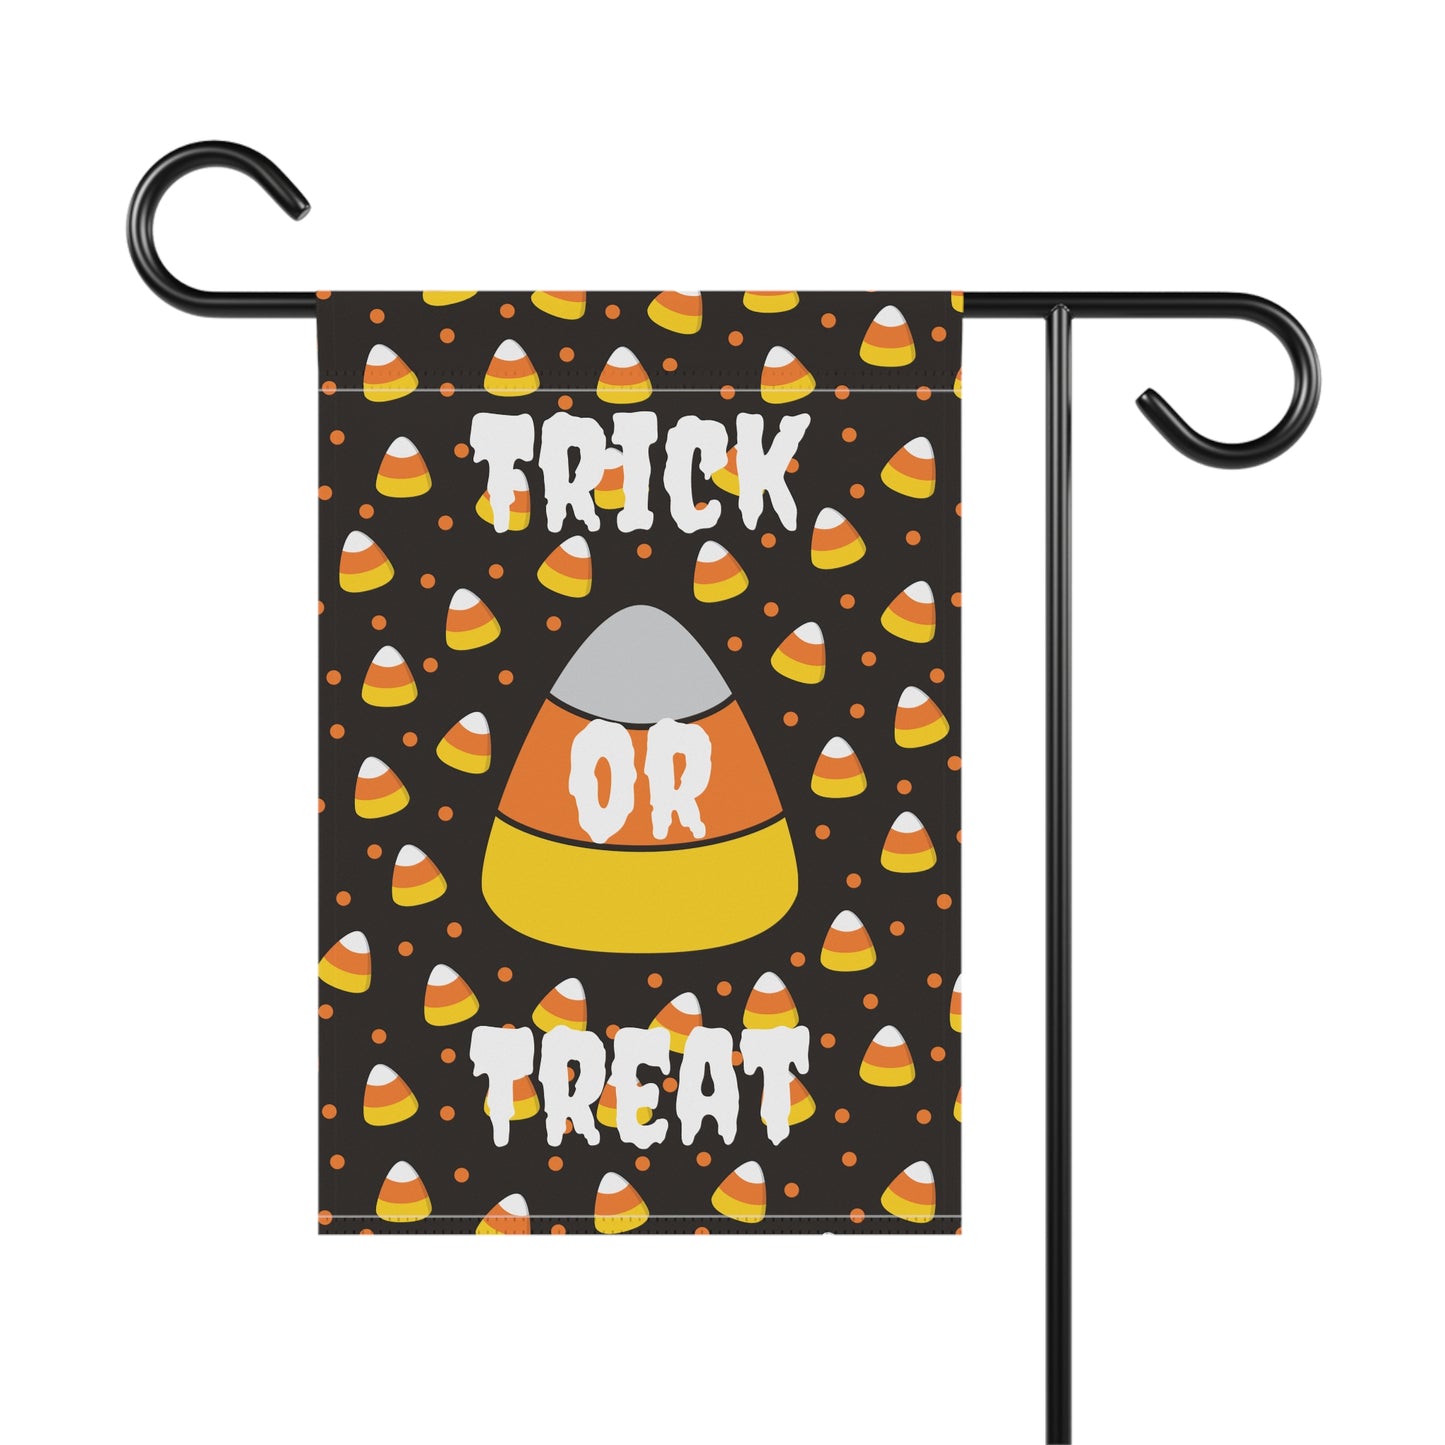 Trick Or Treat Candy Corn Garden & House Banner